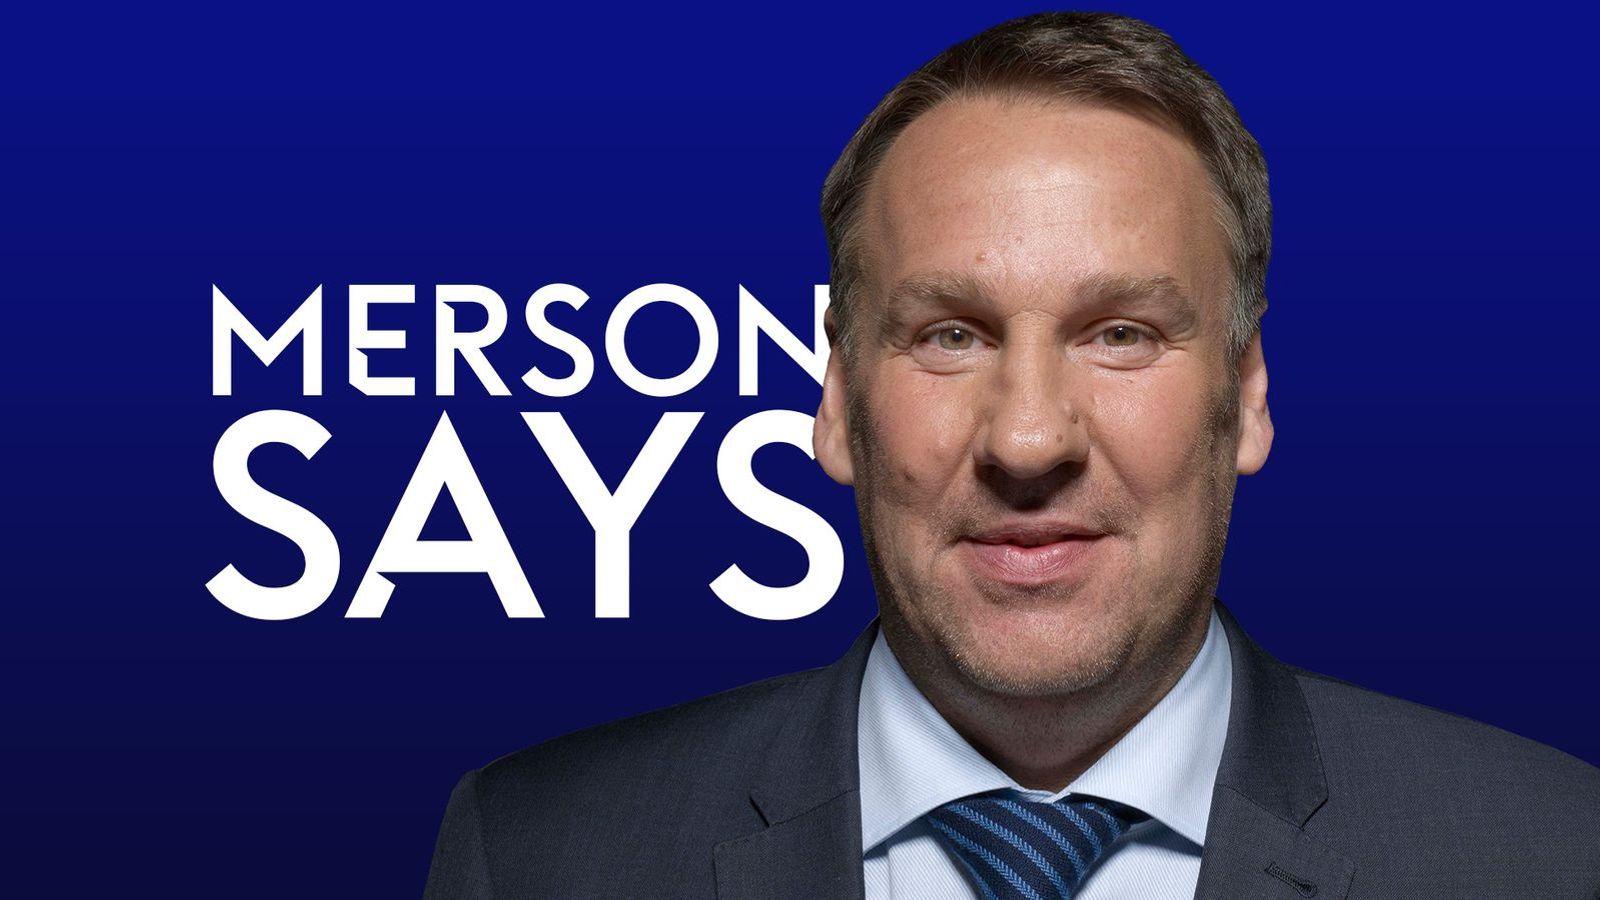 paul-merson-man-utd-must-change-their-tactics-to-beat-man-city-in-fa-cup-final